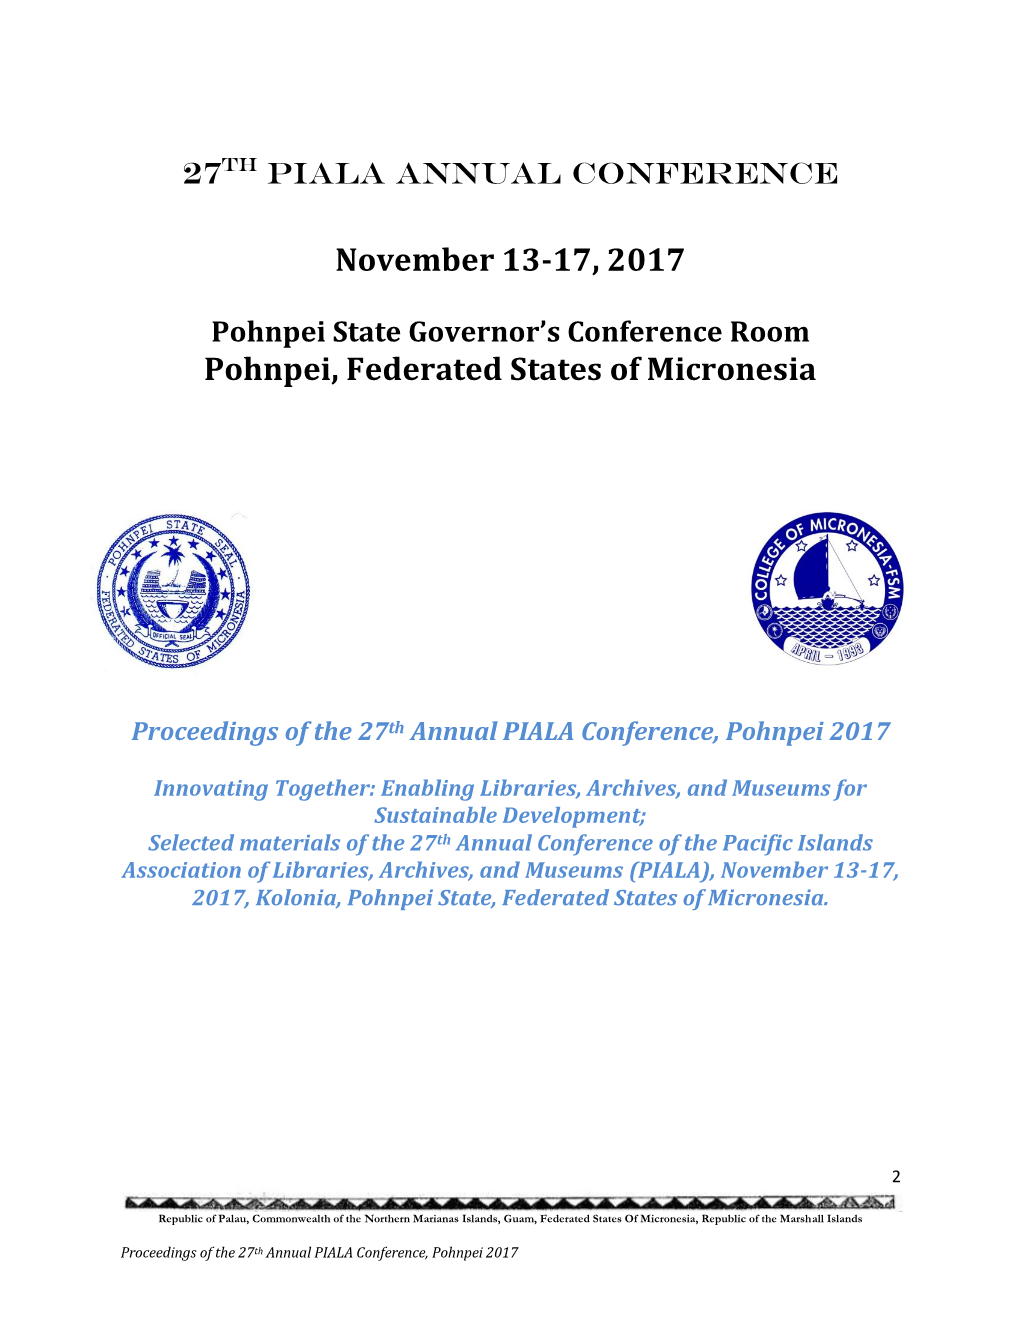 November 13-17, 2017 Pohnpei, Federated States of Micronesia